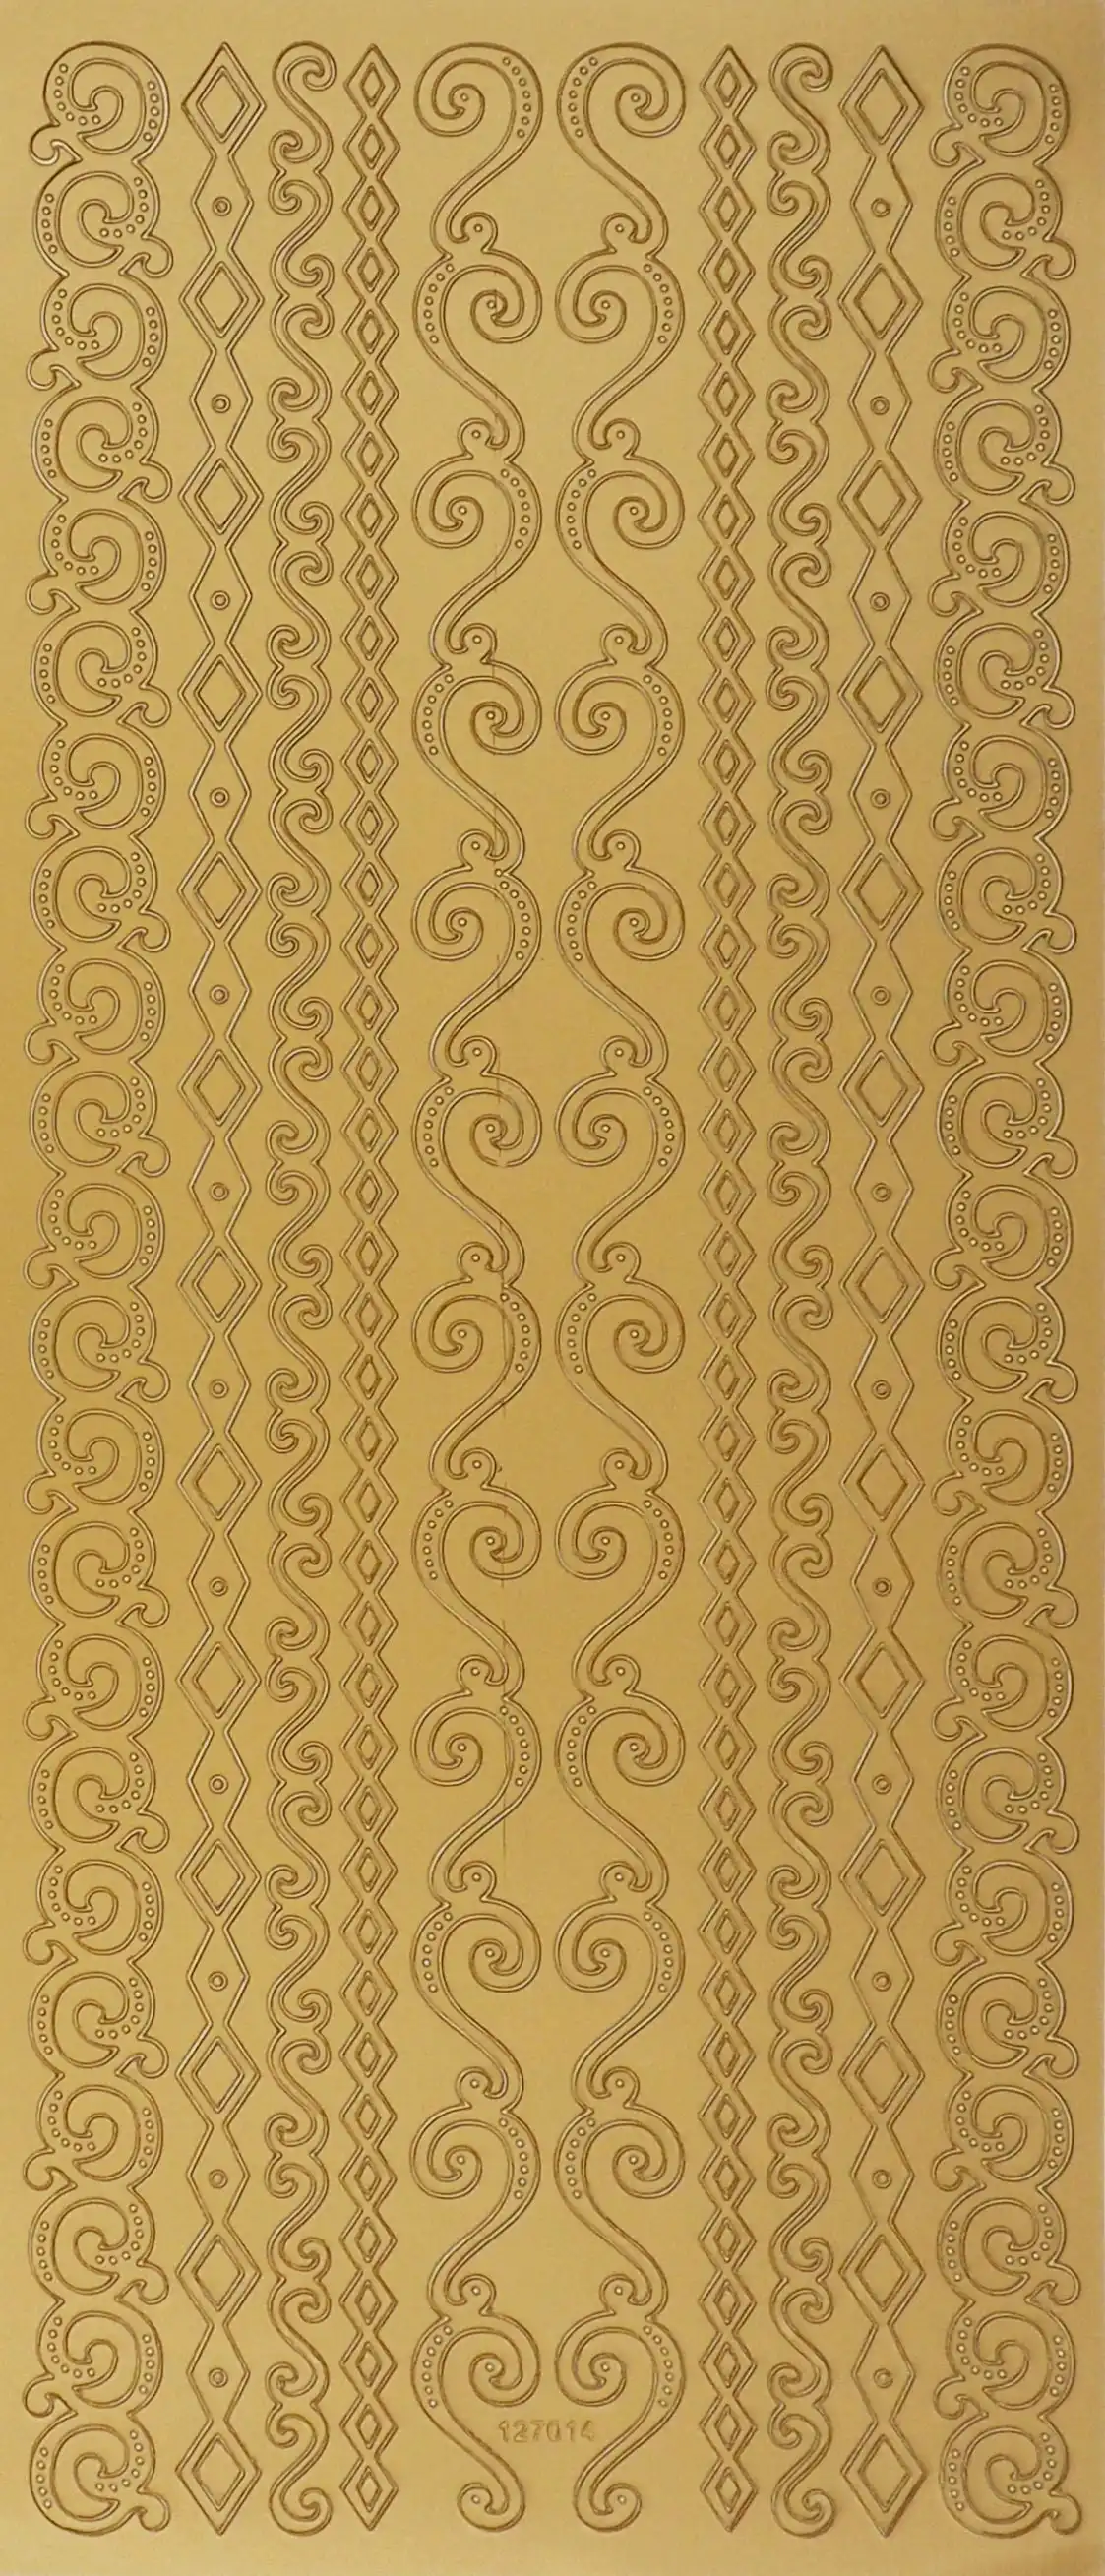 Arbee Foil Stickers Borders, Matte Gold